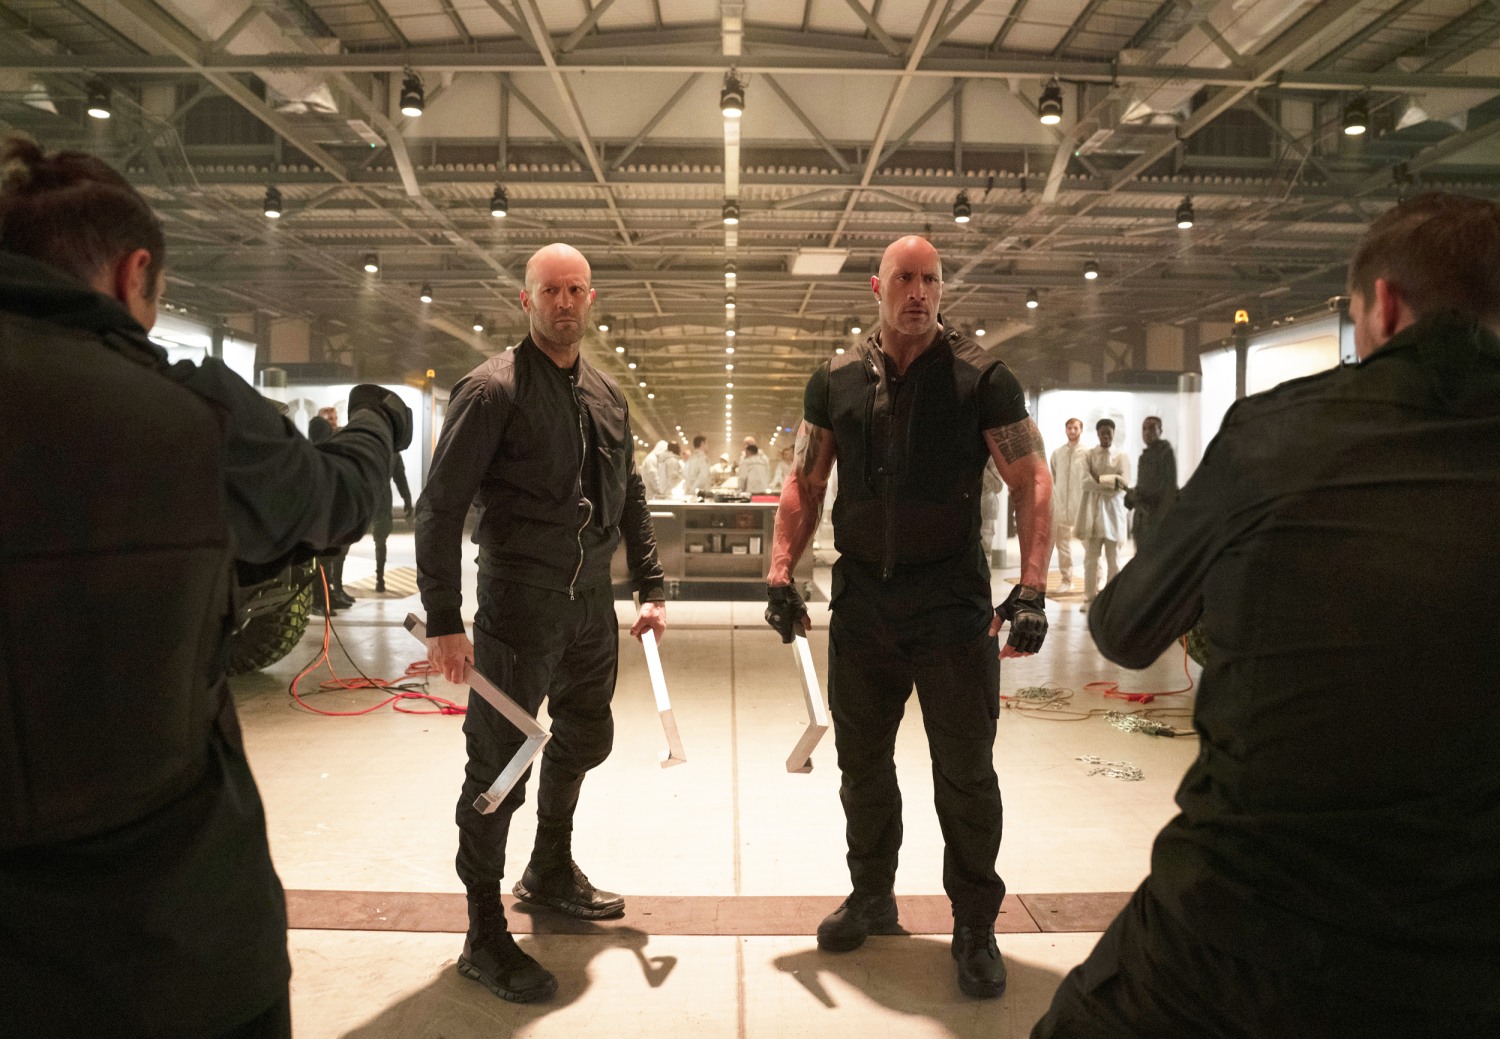 Exactly How 'Fast & Furious' Presents Hobbs & Shaw - The New York